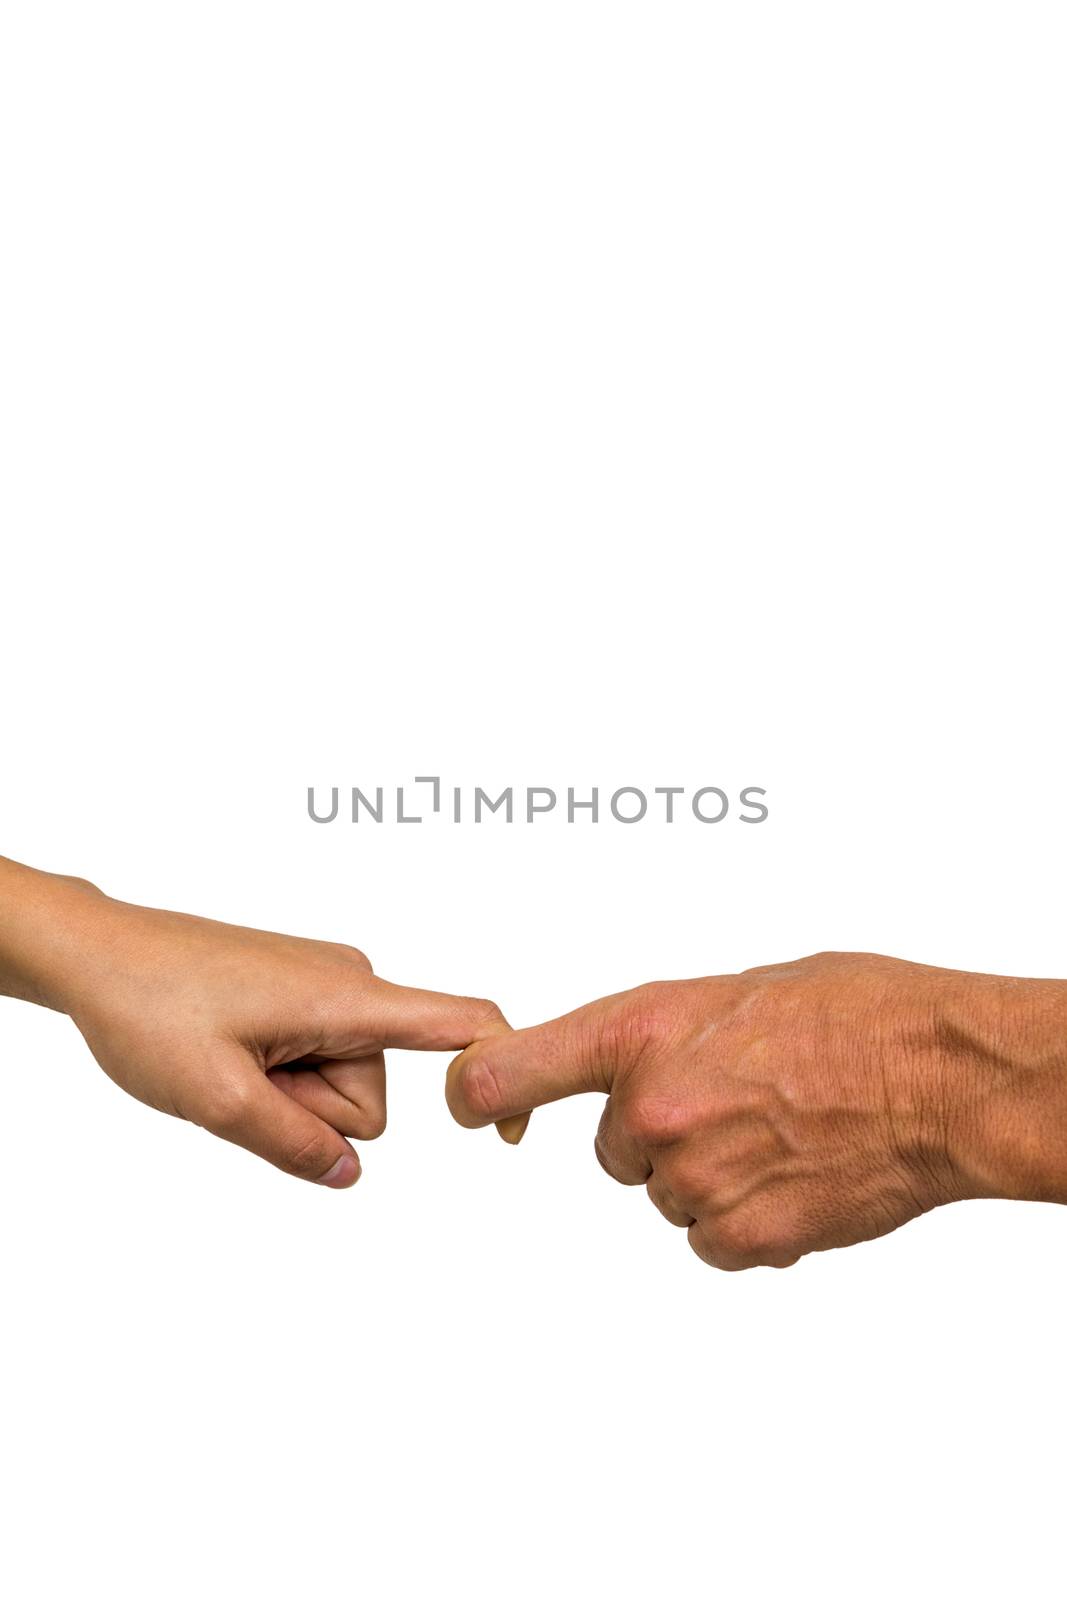 Cropped hands of people holding fingers against white background